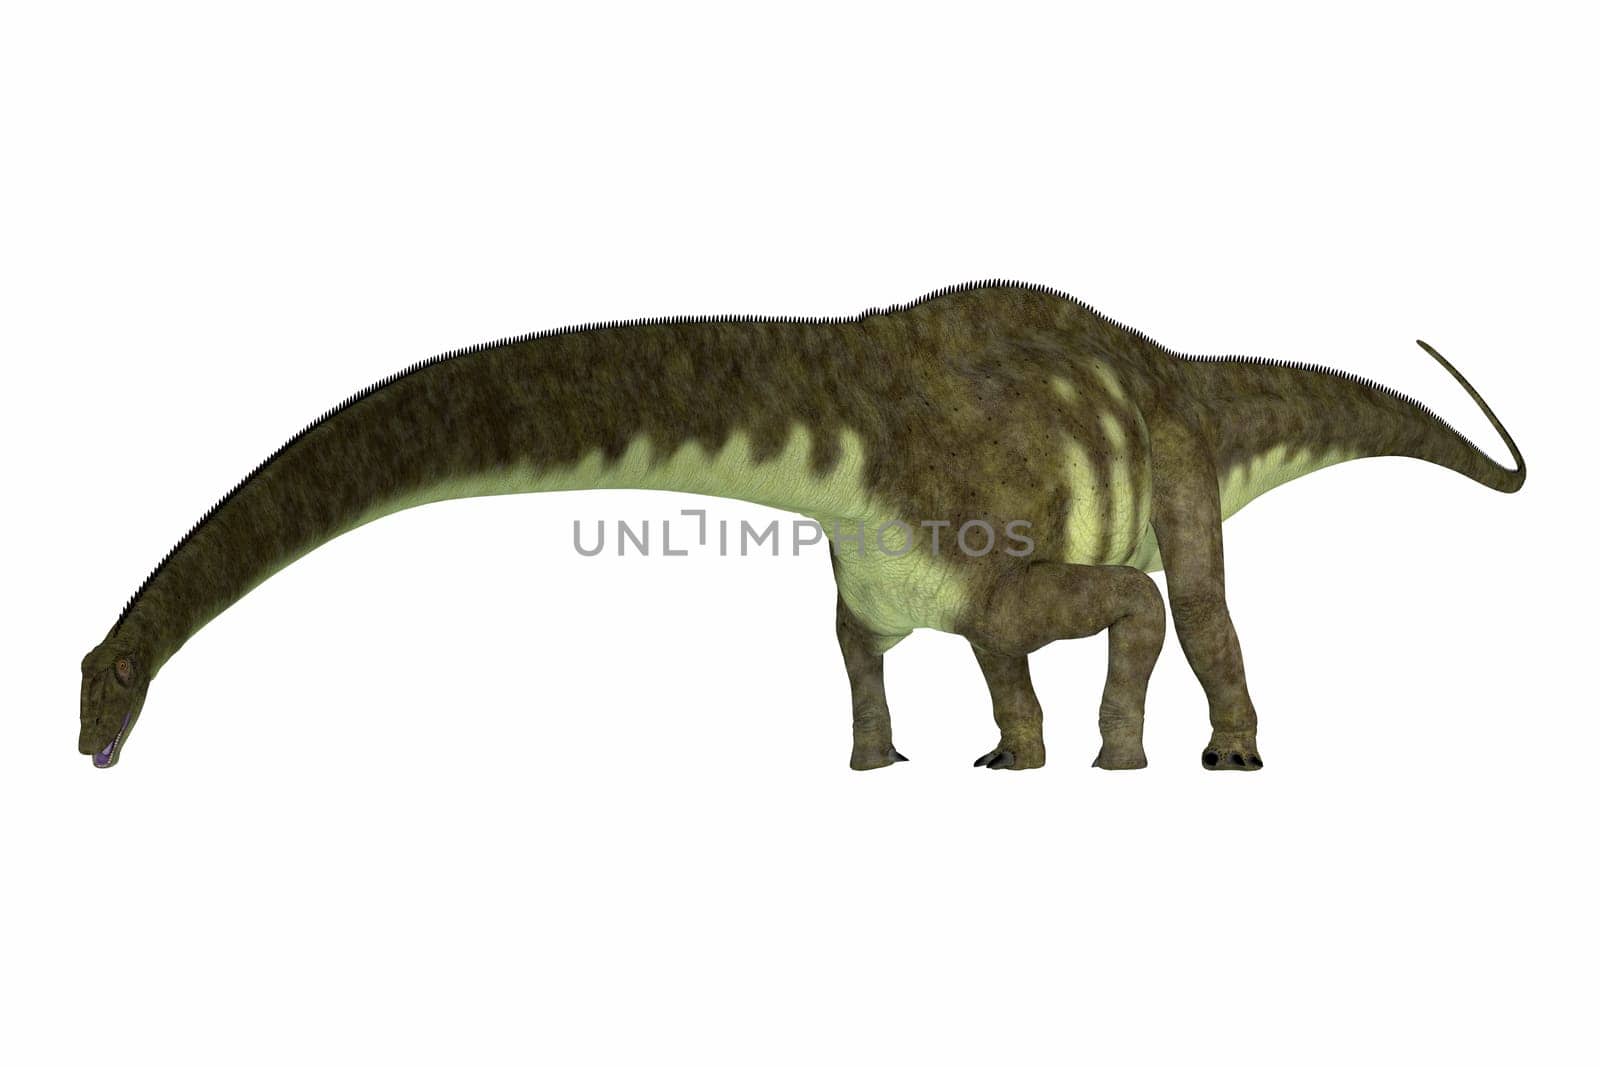 Mamenchisaurus was a herbivorous sauropod dinosaur that lived in the Jurassic Period of China.